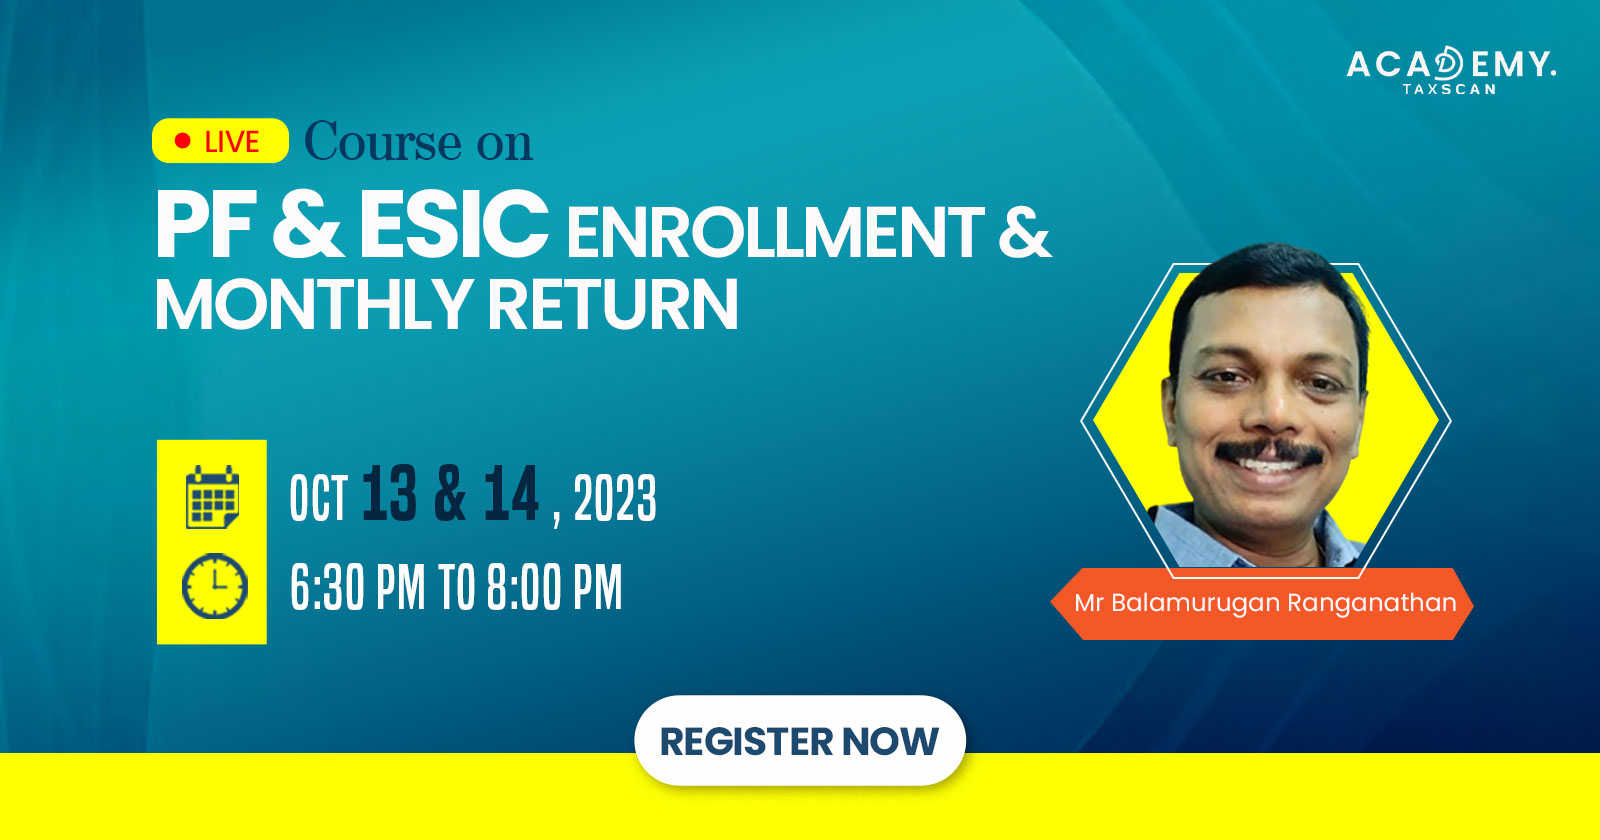 Live Course - PF & ESIC Enrollment - Monthly Return - PF & ESIC Enrollment & Monthly Return - PF - ESIC - Enrollment - online certificate course - Course 2023 - Course - certificate course 2023 - online certificate course 2023 - taxscan academy